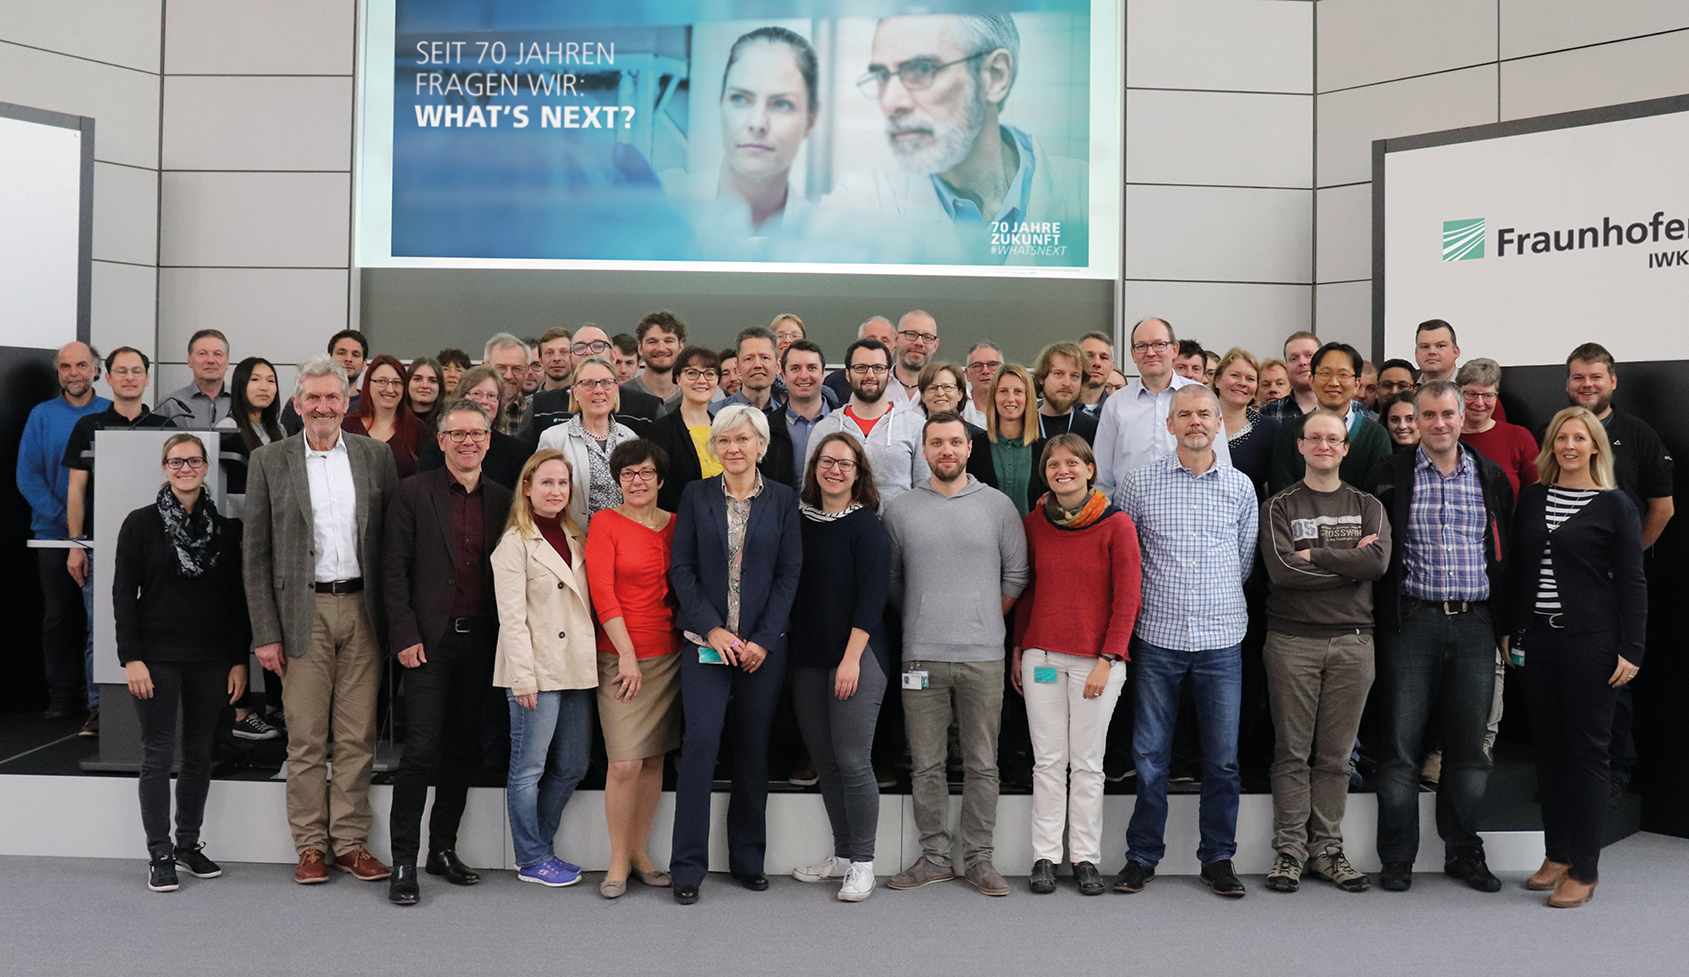 The employees of Fraunhofer IWKS and Dr. Thomas Hofmann, Vice Director of Fraunhofer ISC, are excited about the newly achieved milestone.